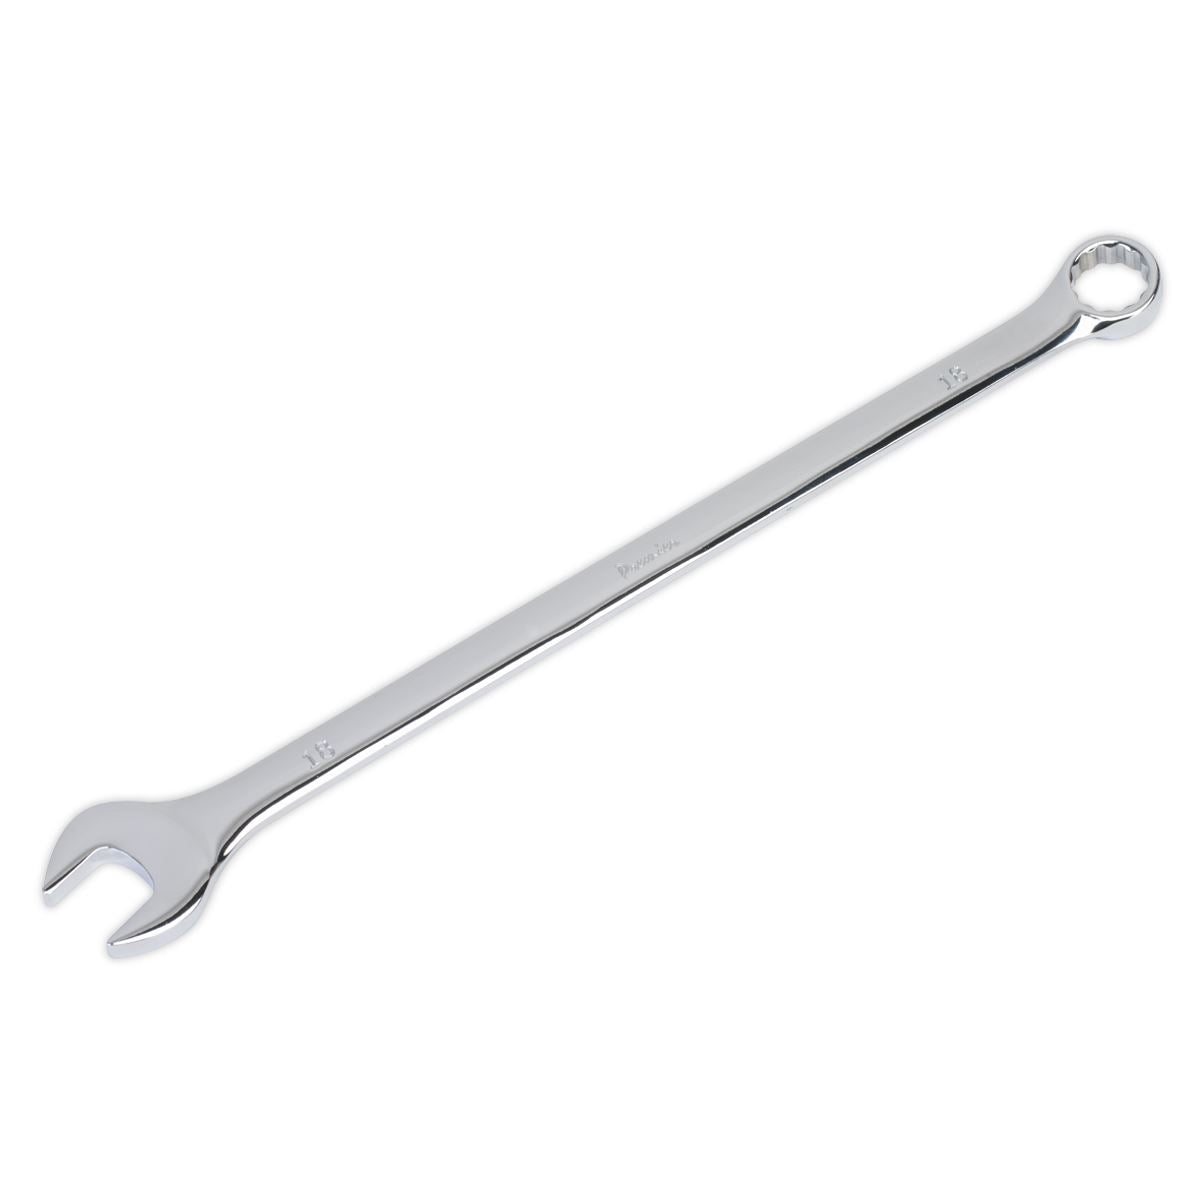 Sealey Premier Combination Spanner Extra-Long 18mm